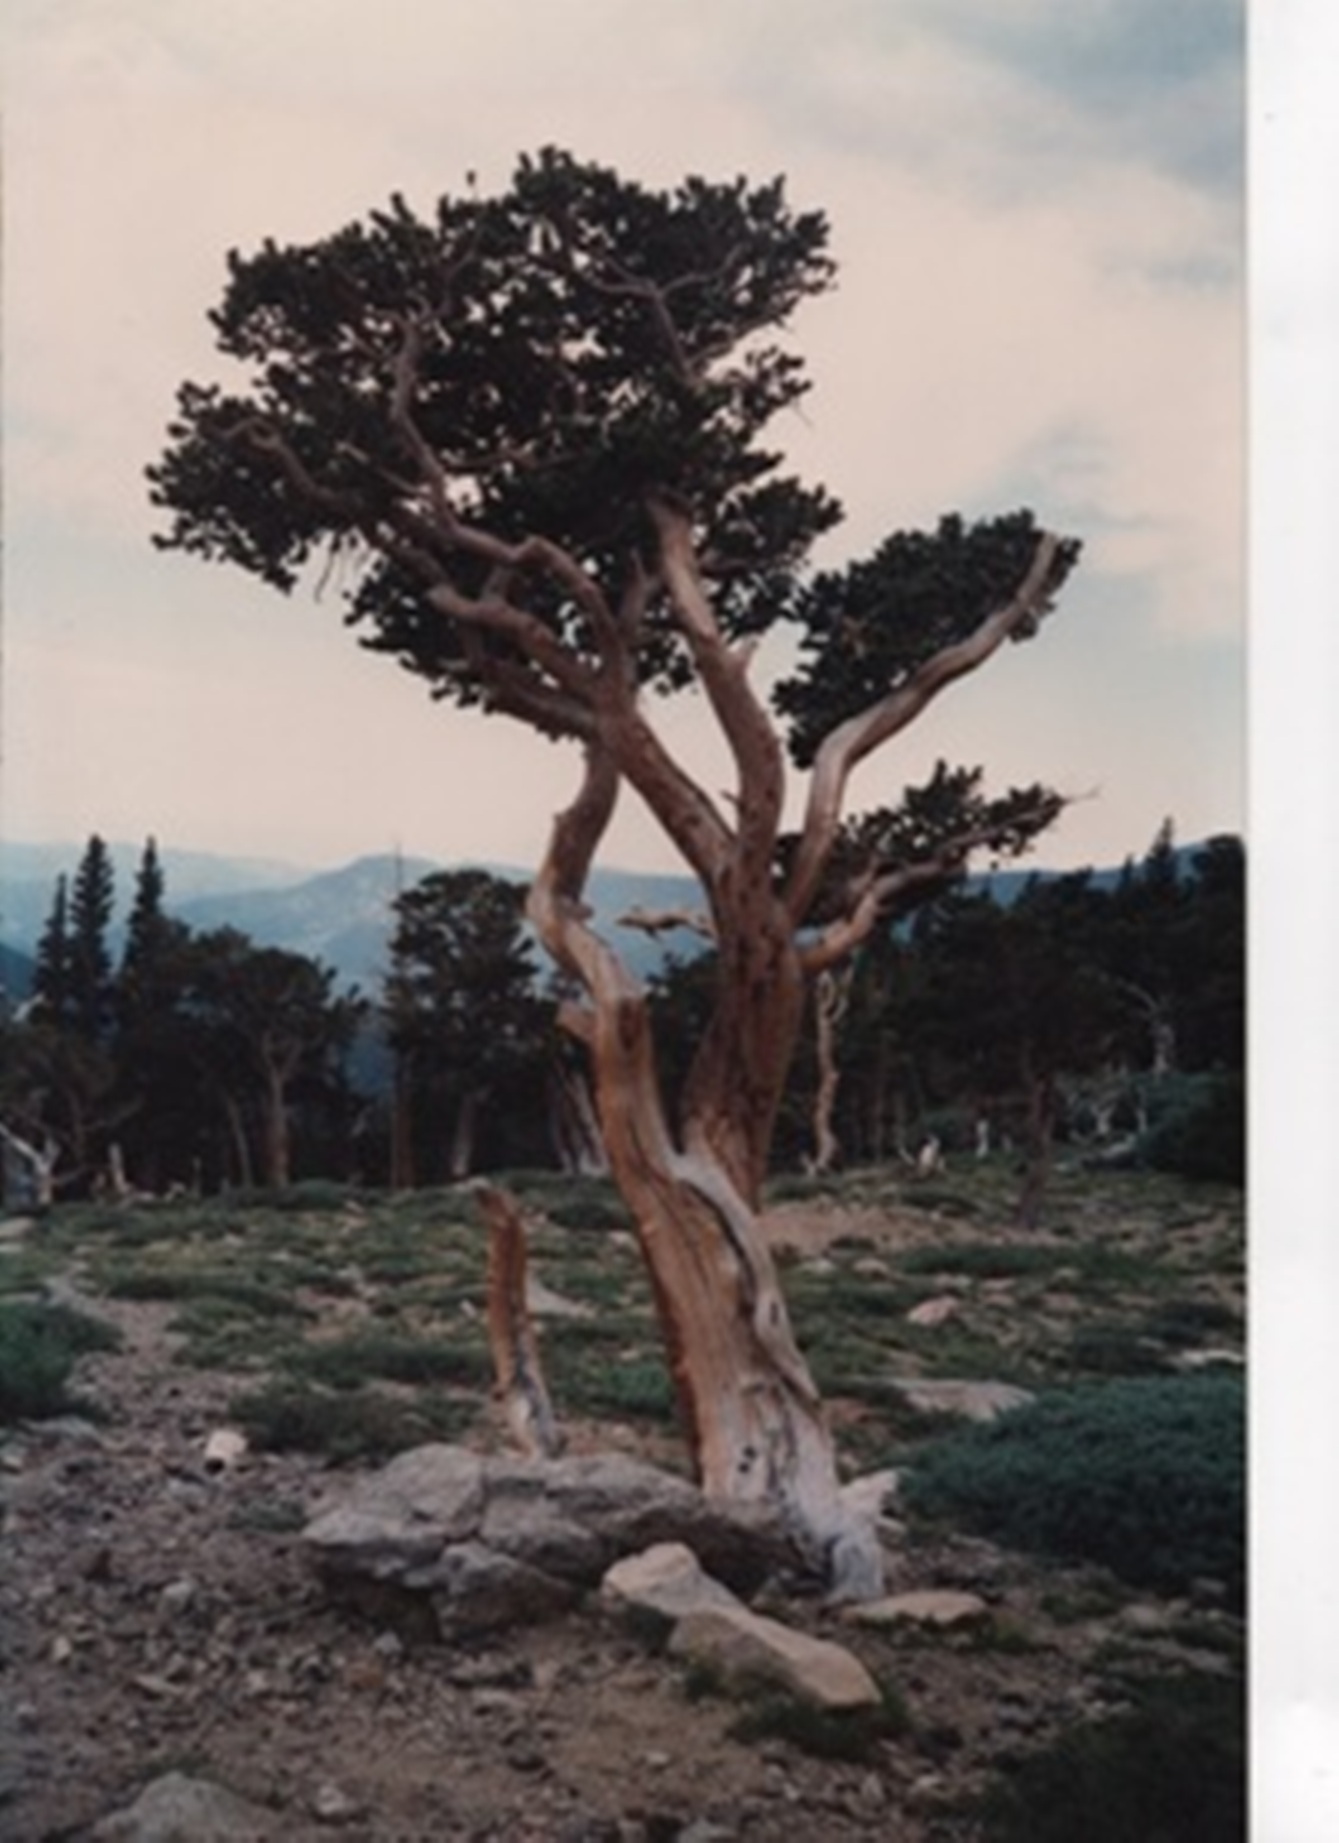 my-photo-taken-in-the-rocky-mountains--of-a-single-tree--with-light-bark-of-the-trunk-curving-around-the-first-twenty-feet--and-then-a-thin-layer-of-dark-green-leaves-going-across-the-top